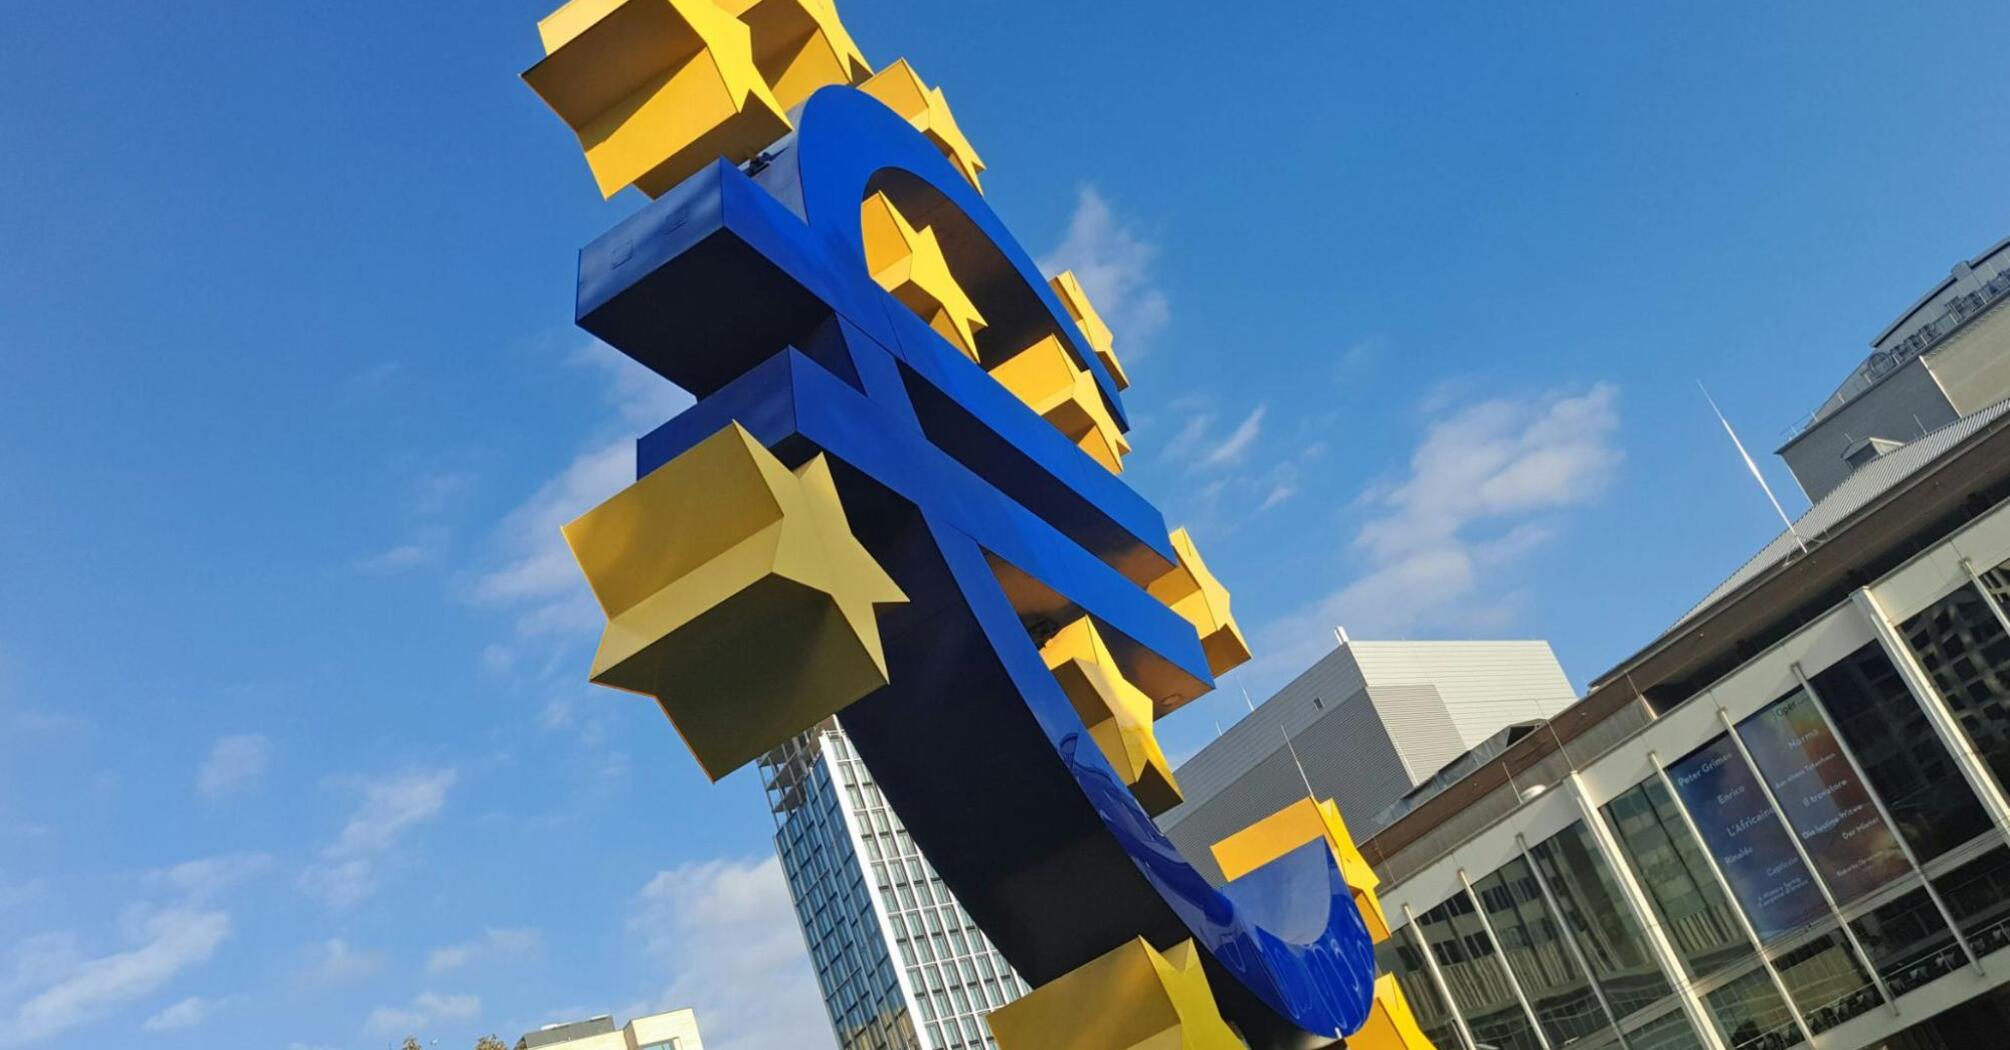 Euro currency sign in Frankfurt, Germany